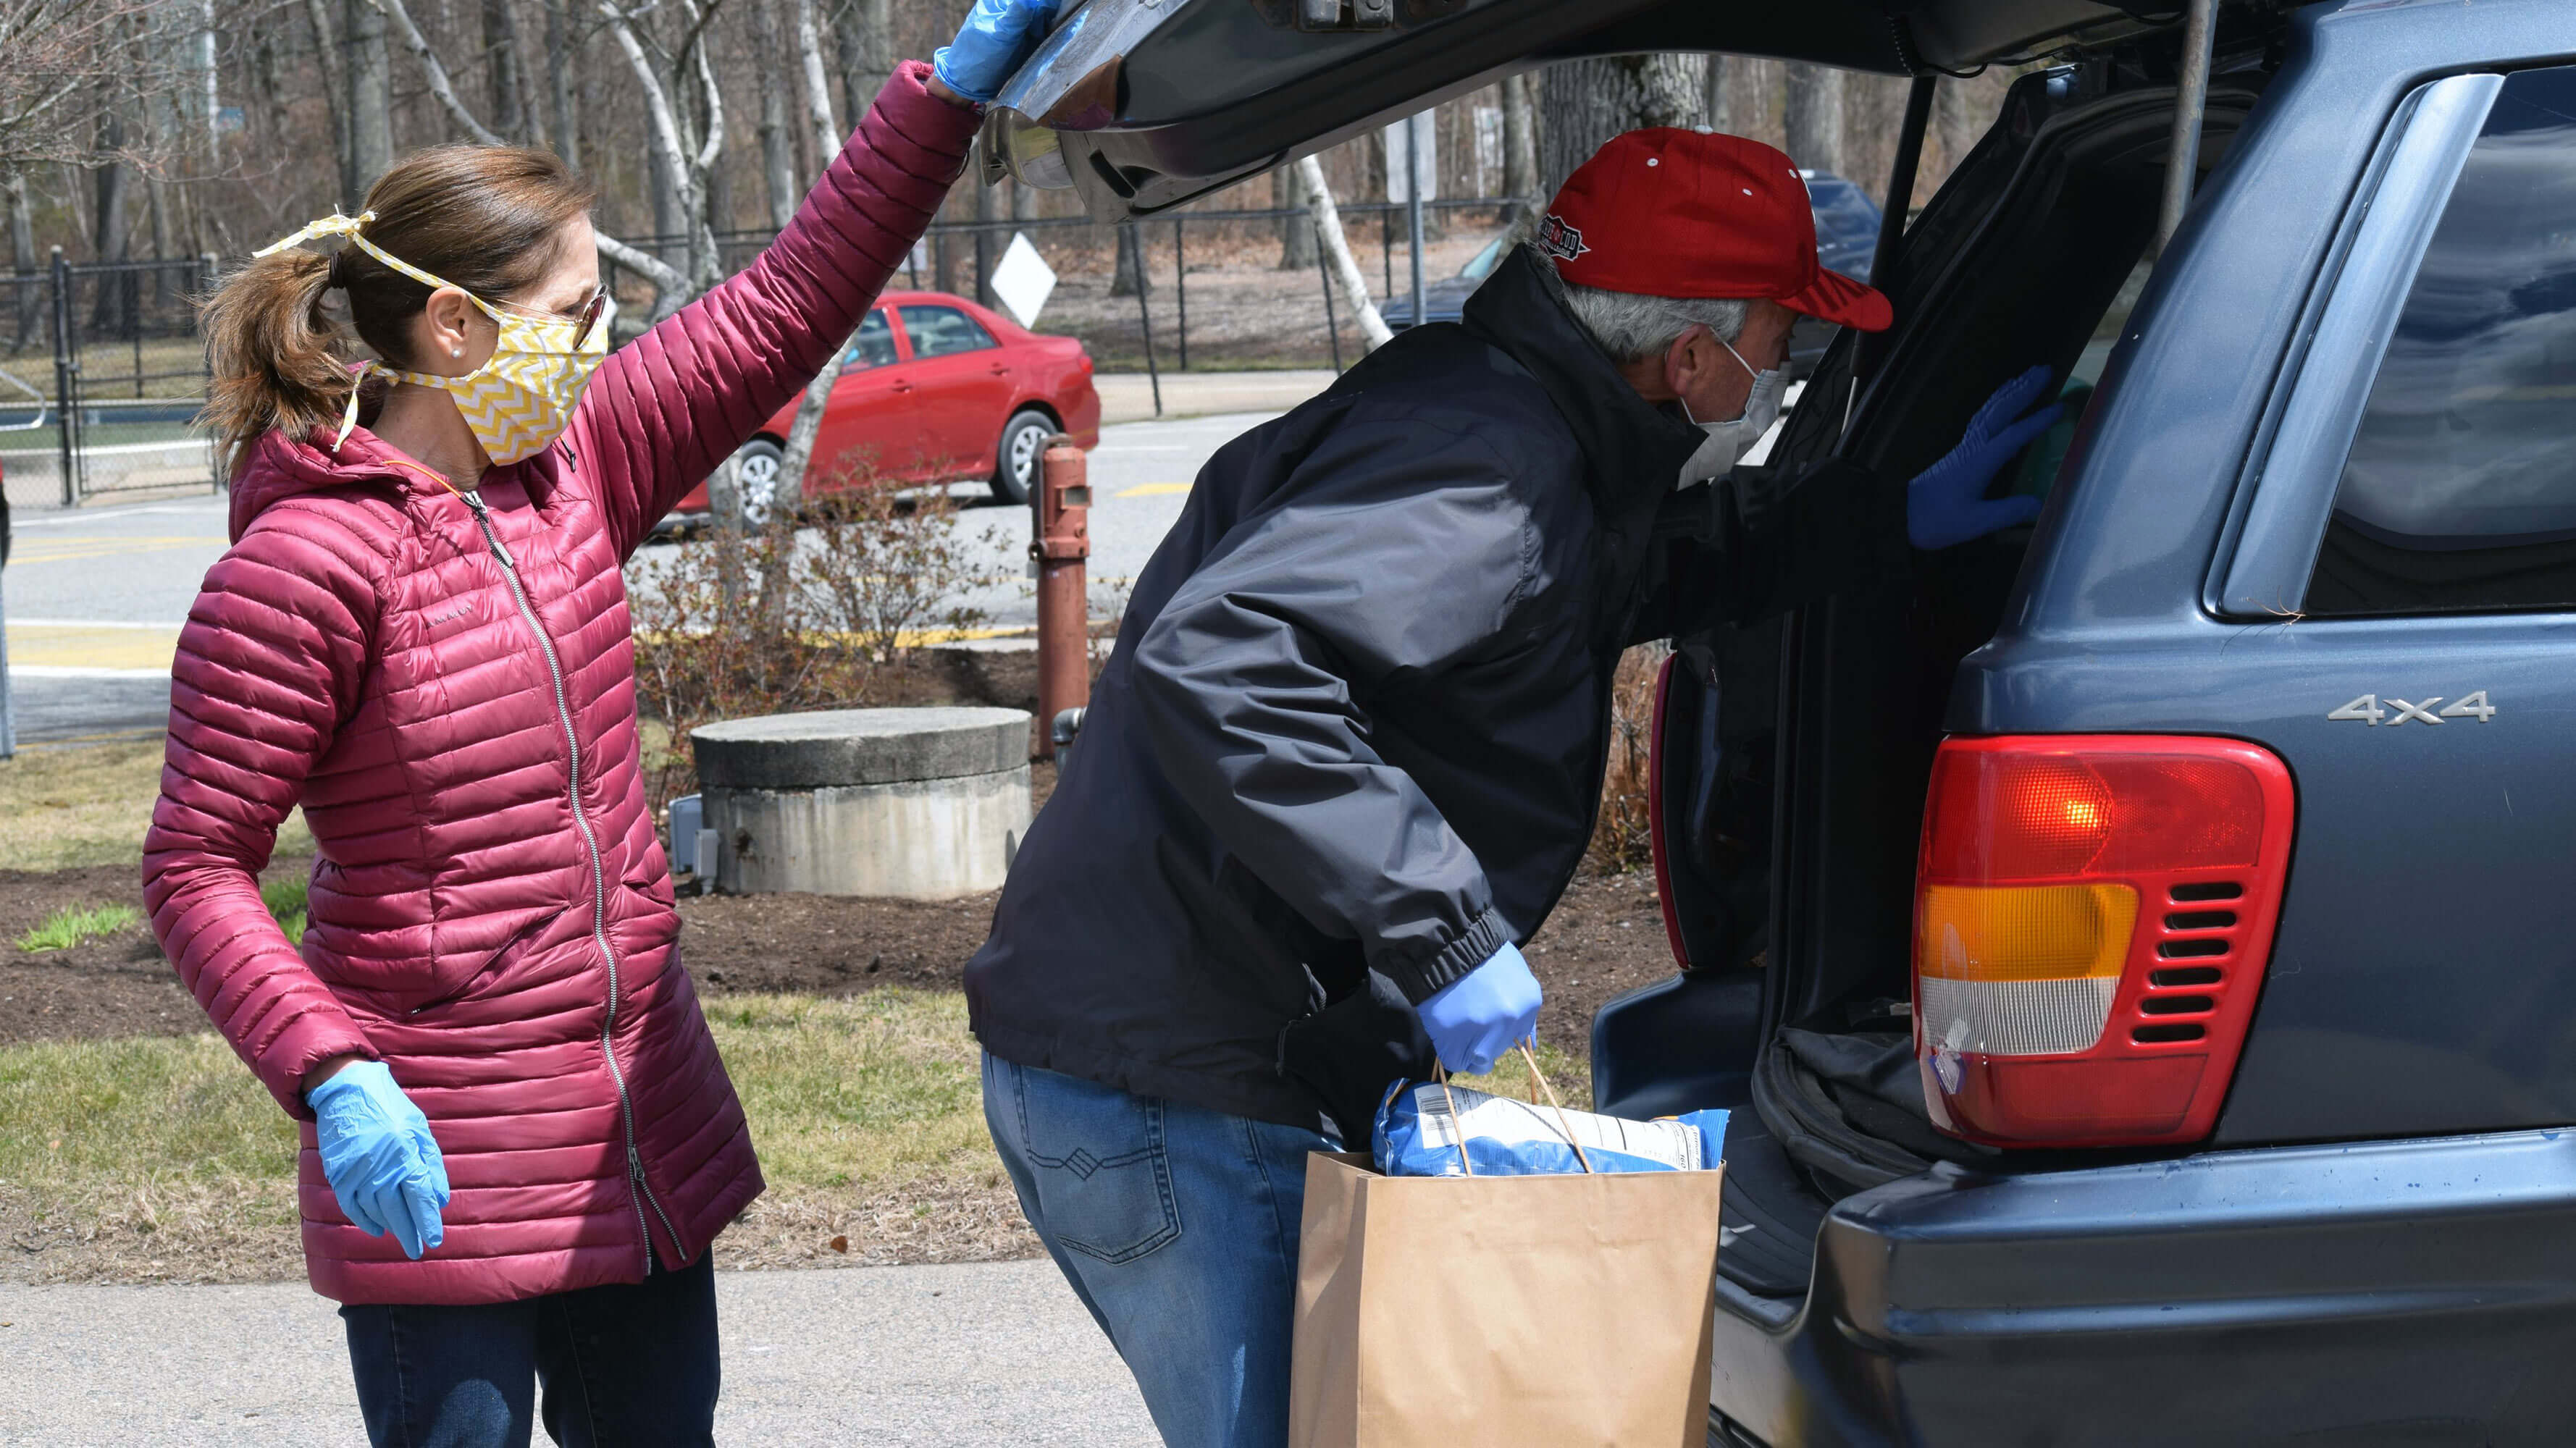 Hockomock area YMCA Board Chairman Mary Clermont and President Ed Hurley loading food into a vehicle.